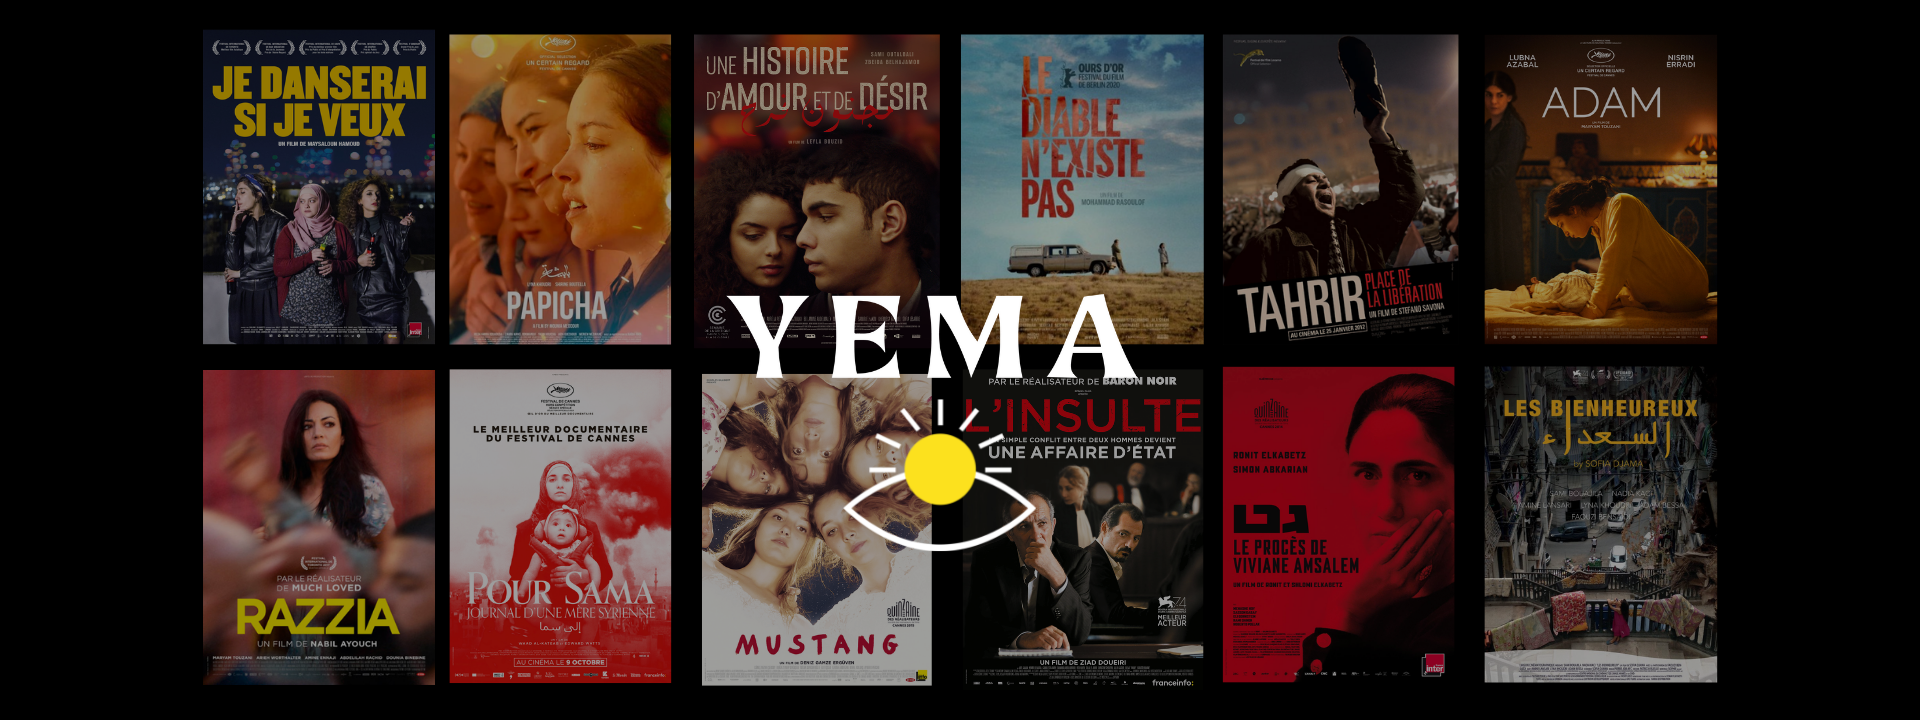 June 9th launch for YEMA, a VOD platform for films from North-Africa and the Middle-East